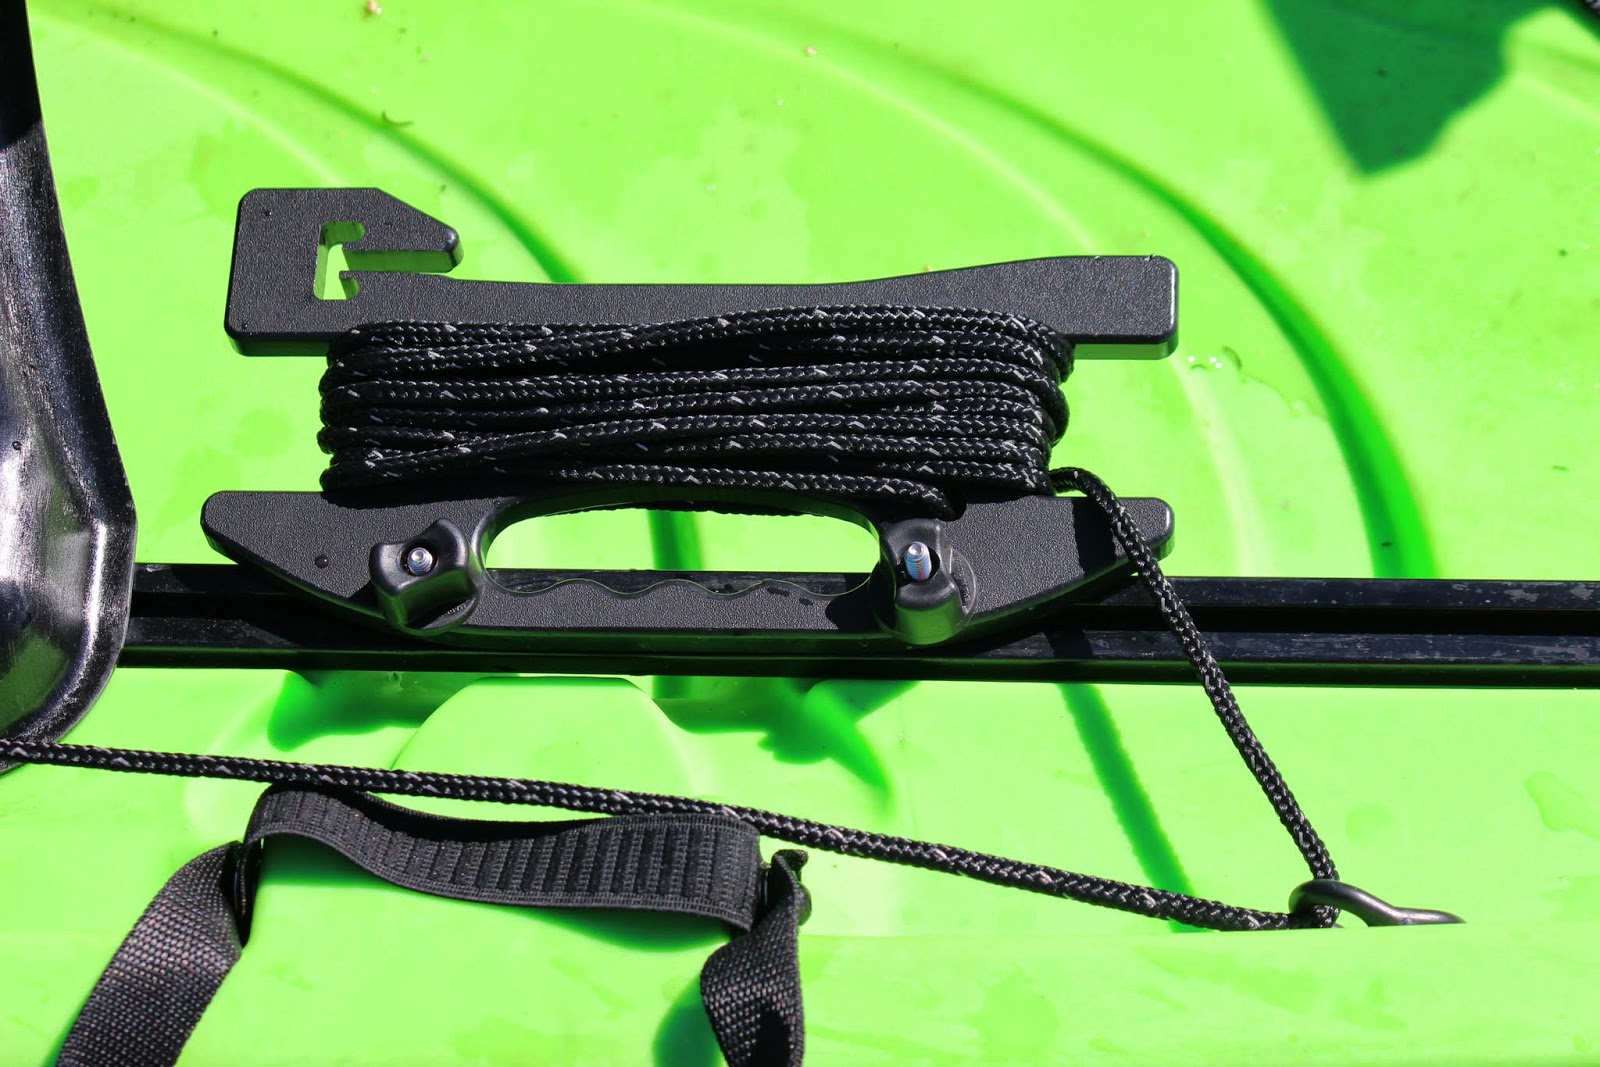 The NuCanoe Blog: New Yak Attack Gear on the Frontier